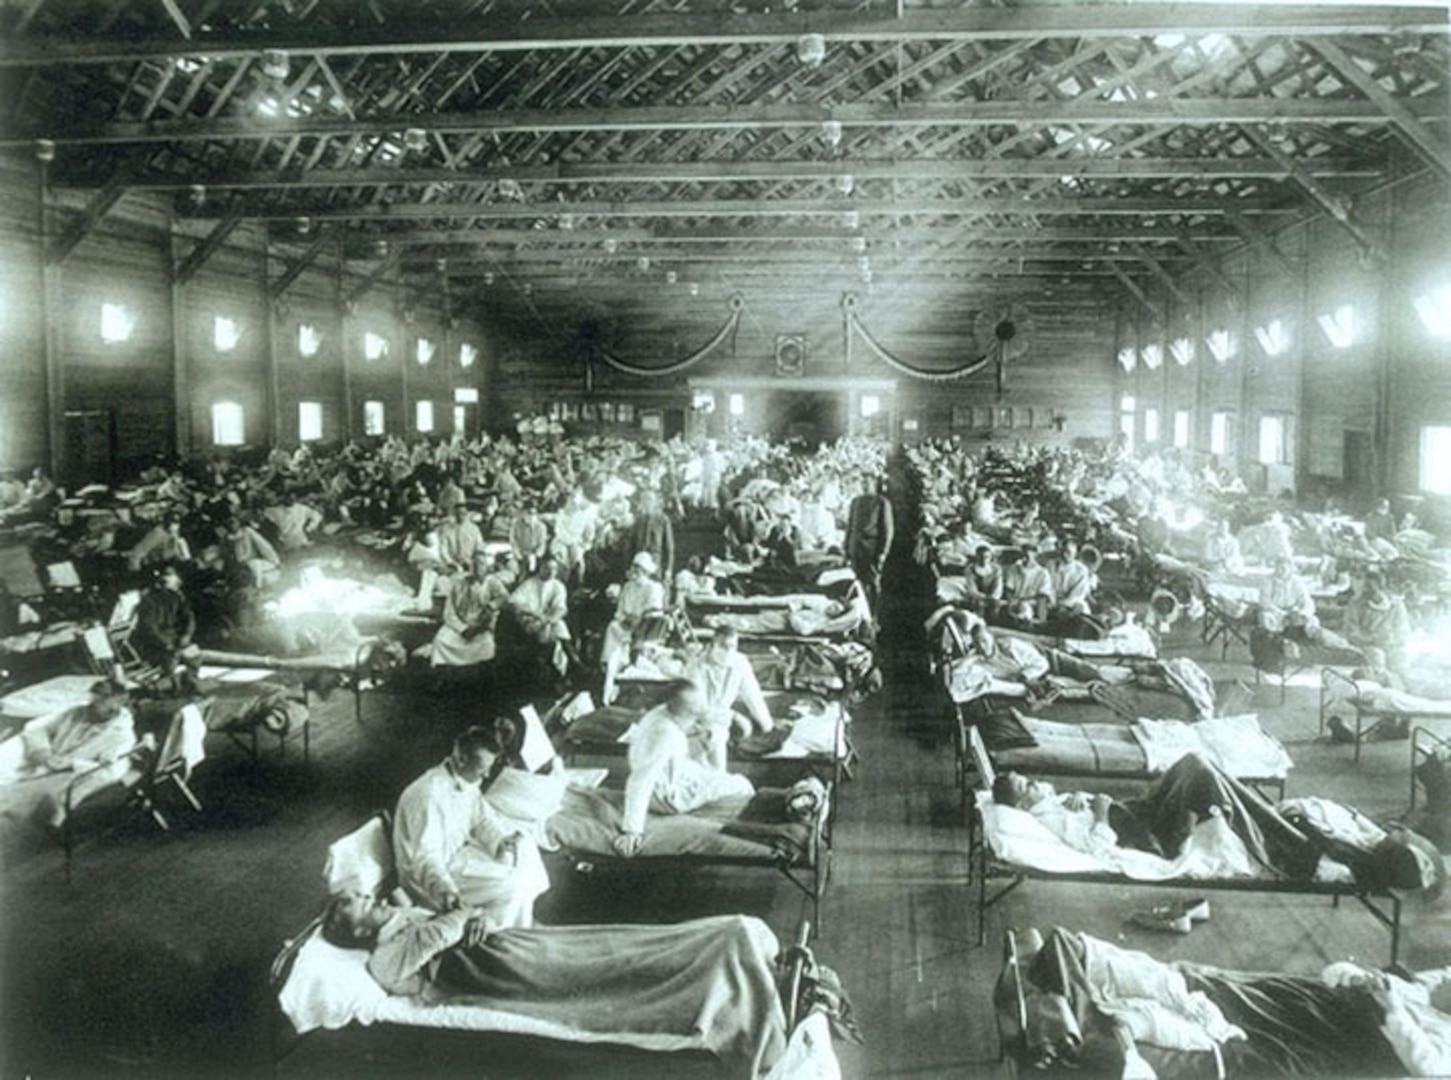 Soldiers suffering from influenza at the hospital in Camp Funston, Kansas, in 1918. Camp Funston was where the influenza epidemic which would kill more than 50 million people world-wide, including 675,000 Americans, first made a major appearance. Troops from the camp carried the virus to other Army bases during World War I.